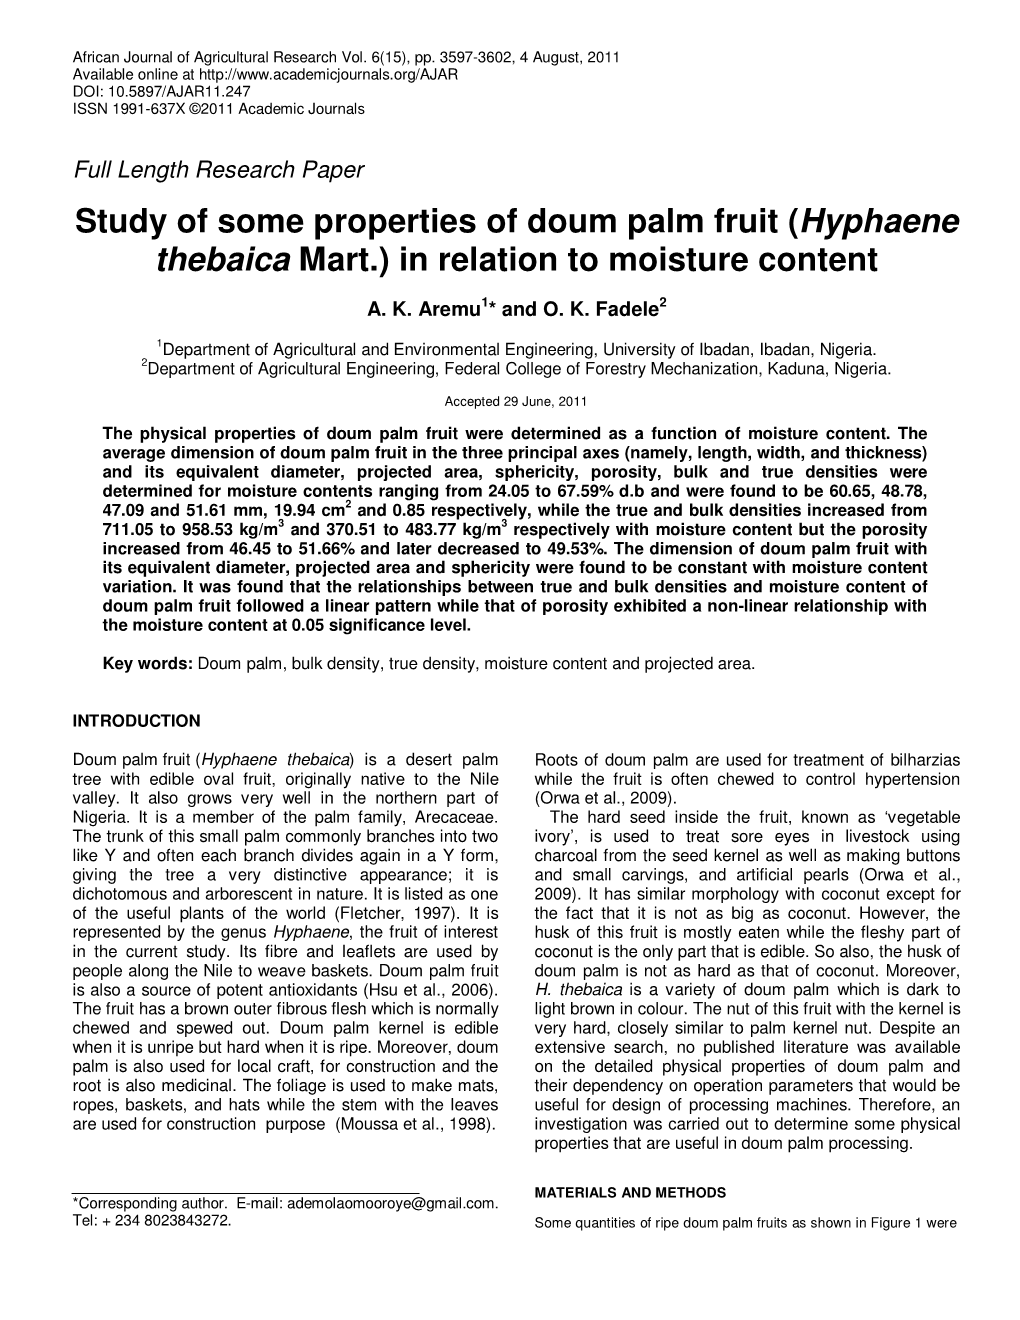 Study of Some Properties of Doum Palm Fruit (Hyphaene Thebaica Mart.) in Relation to Moisture Content